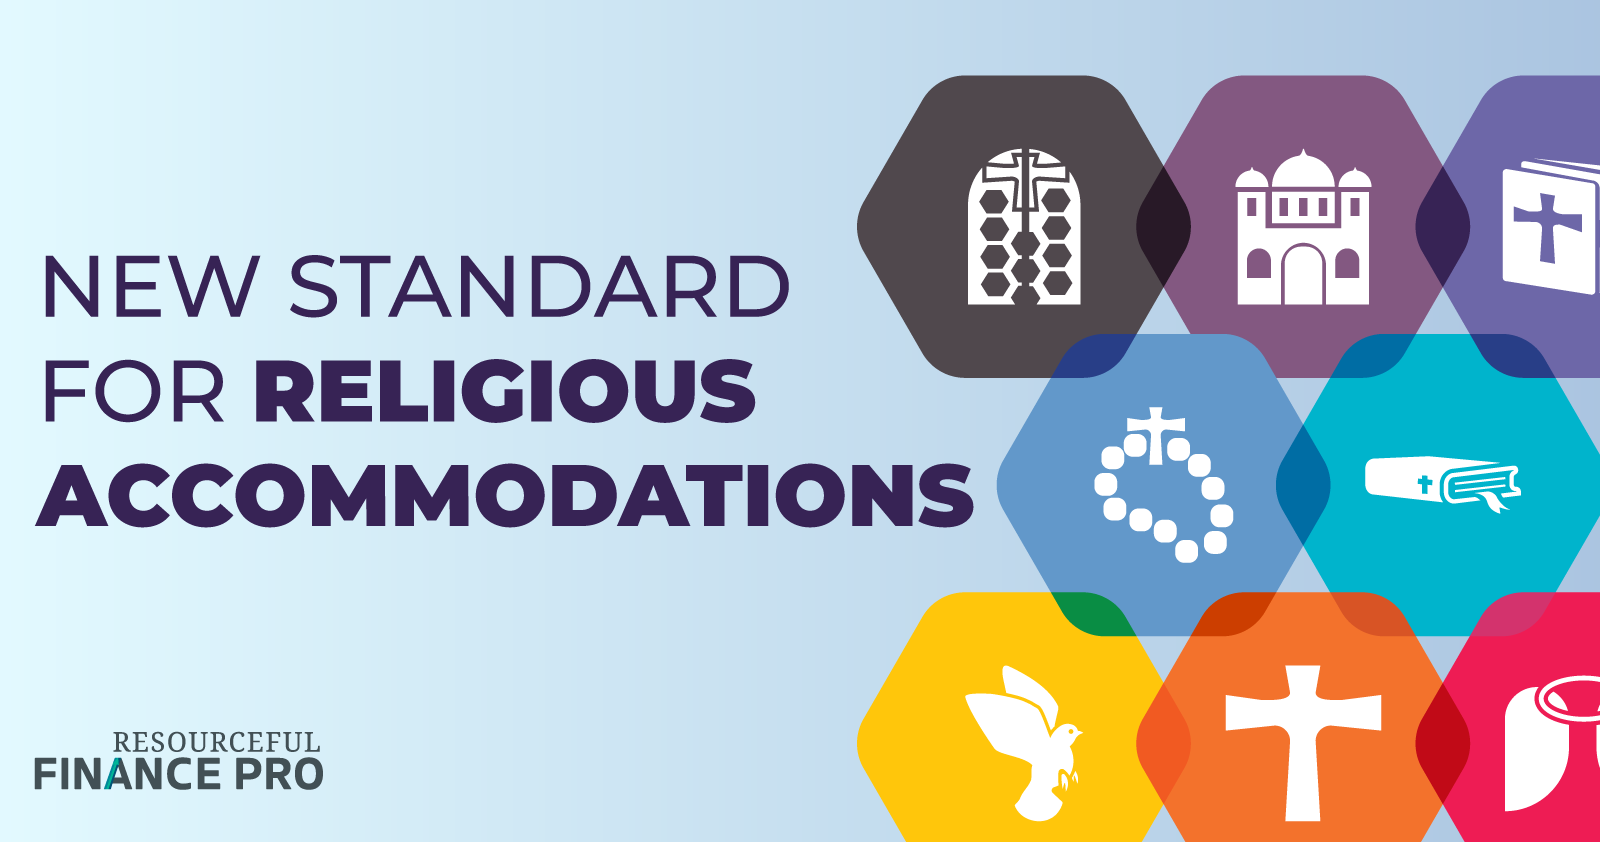 New standard for religious accommodations